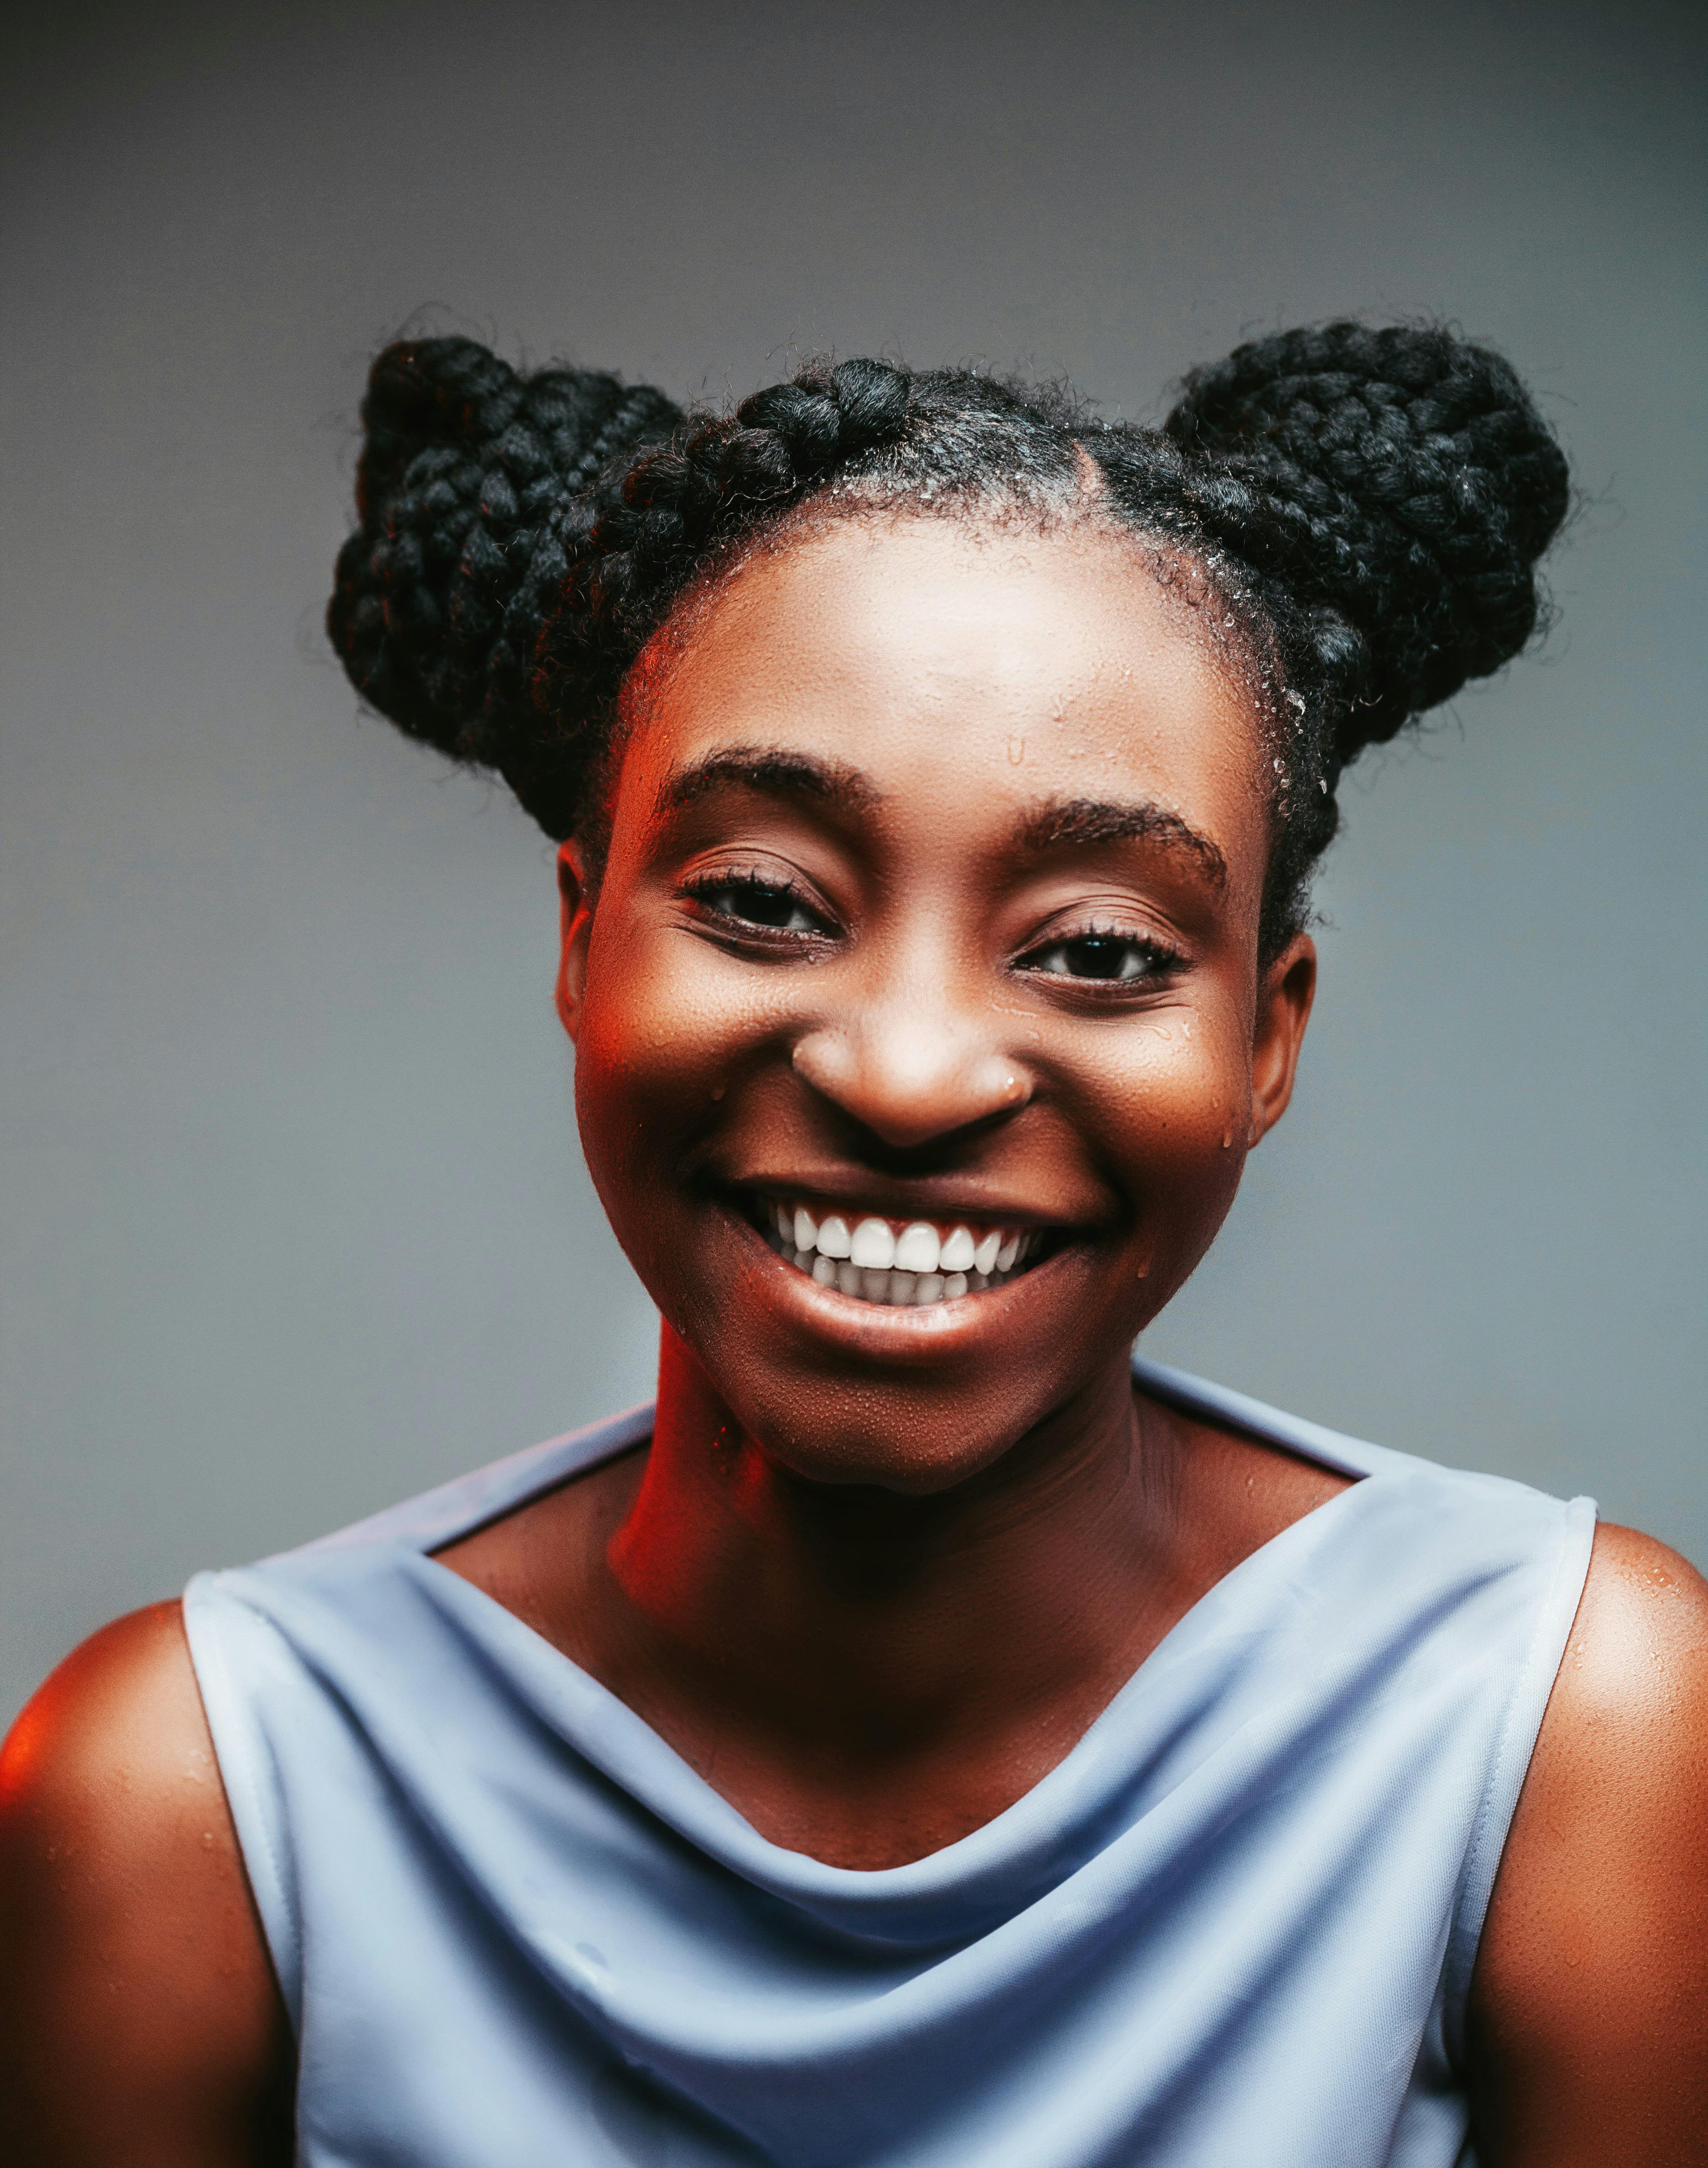 Woman with Space Buns Hairstyle Smiling · Free Stock Photo